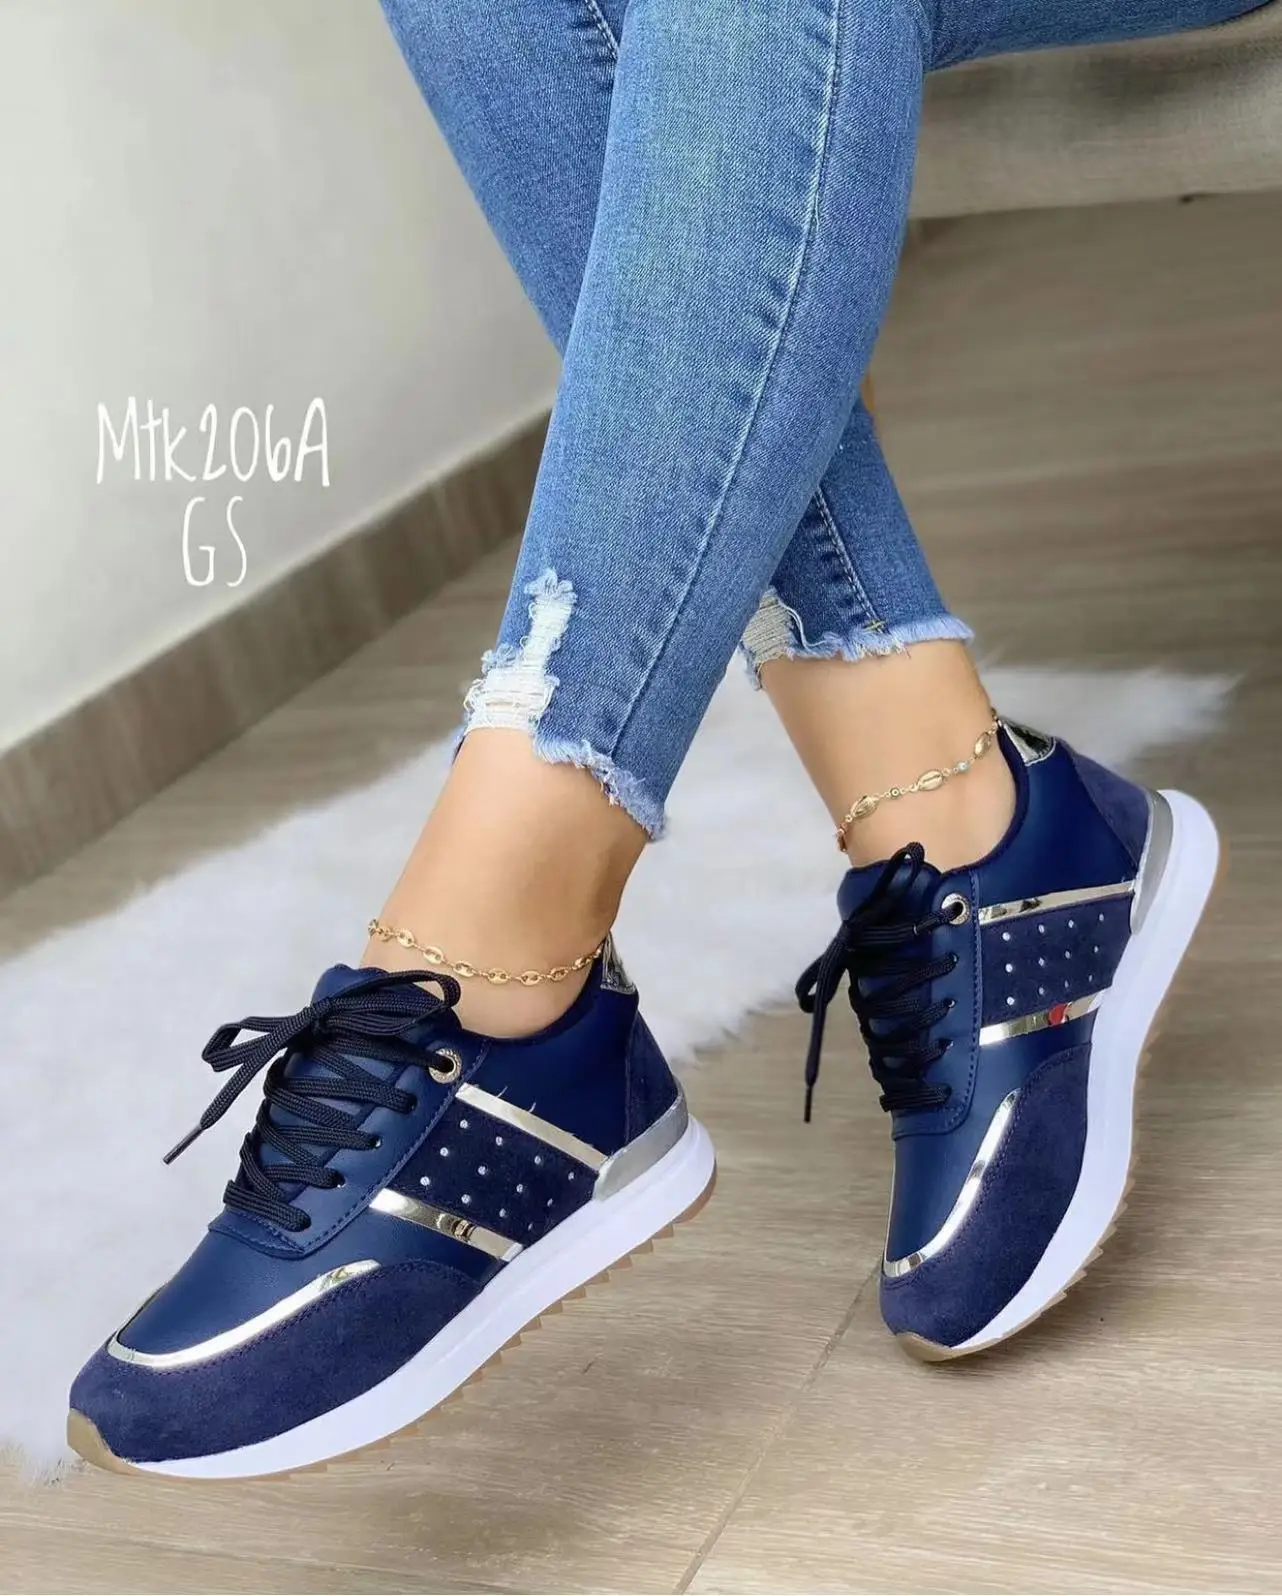 Hot sale Breathable Light Weight Sneaker Solid Color Round Head Casual Sport ShoesFor Women